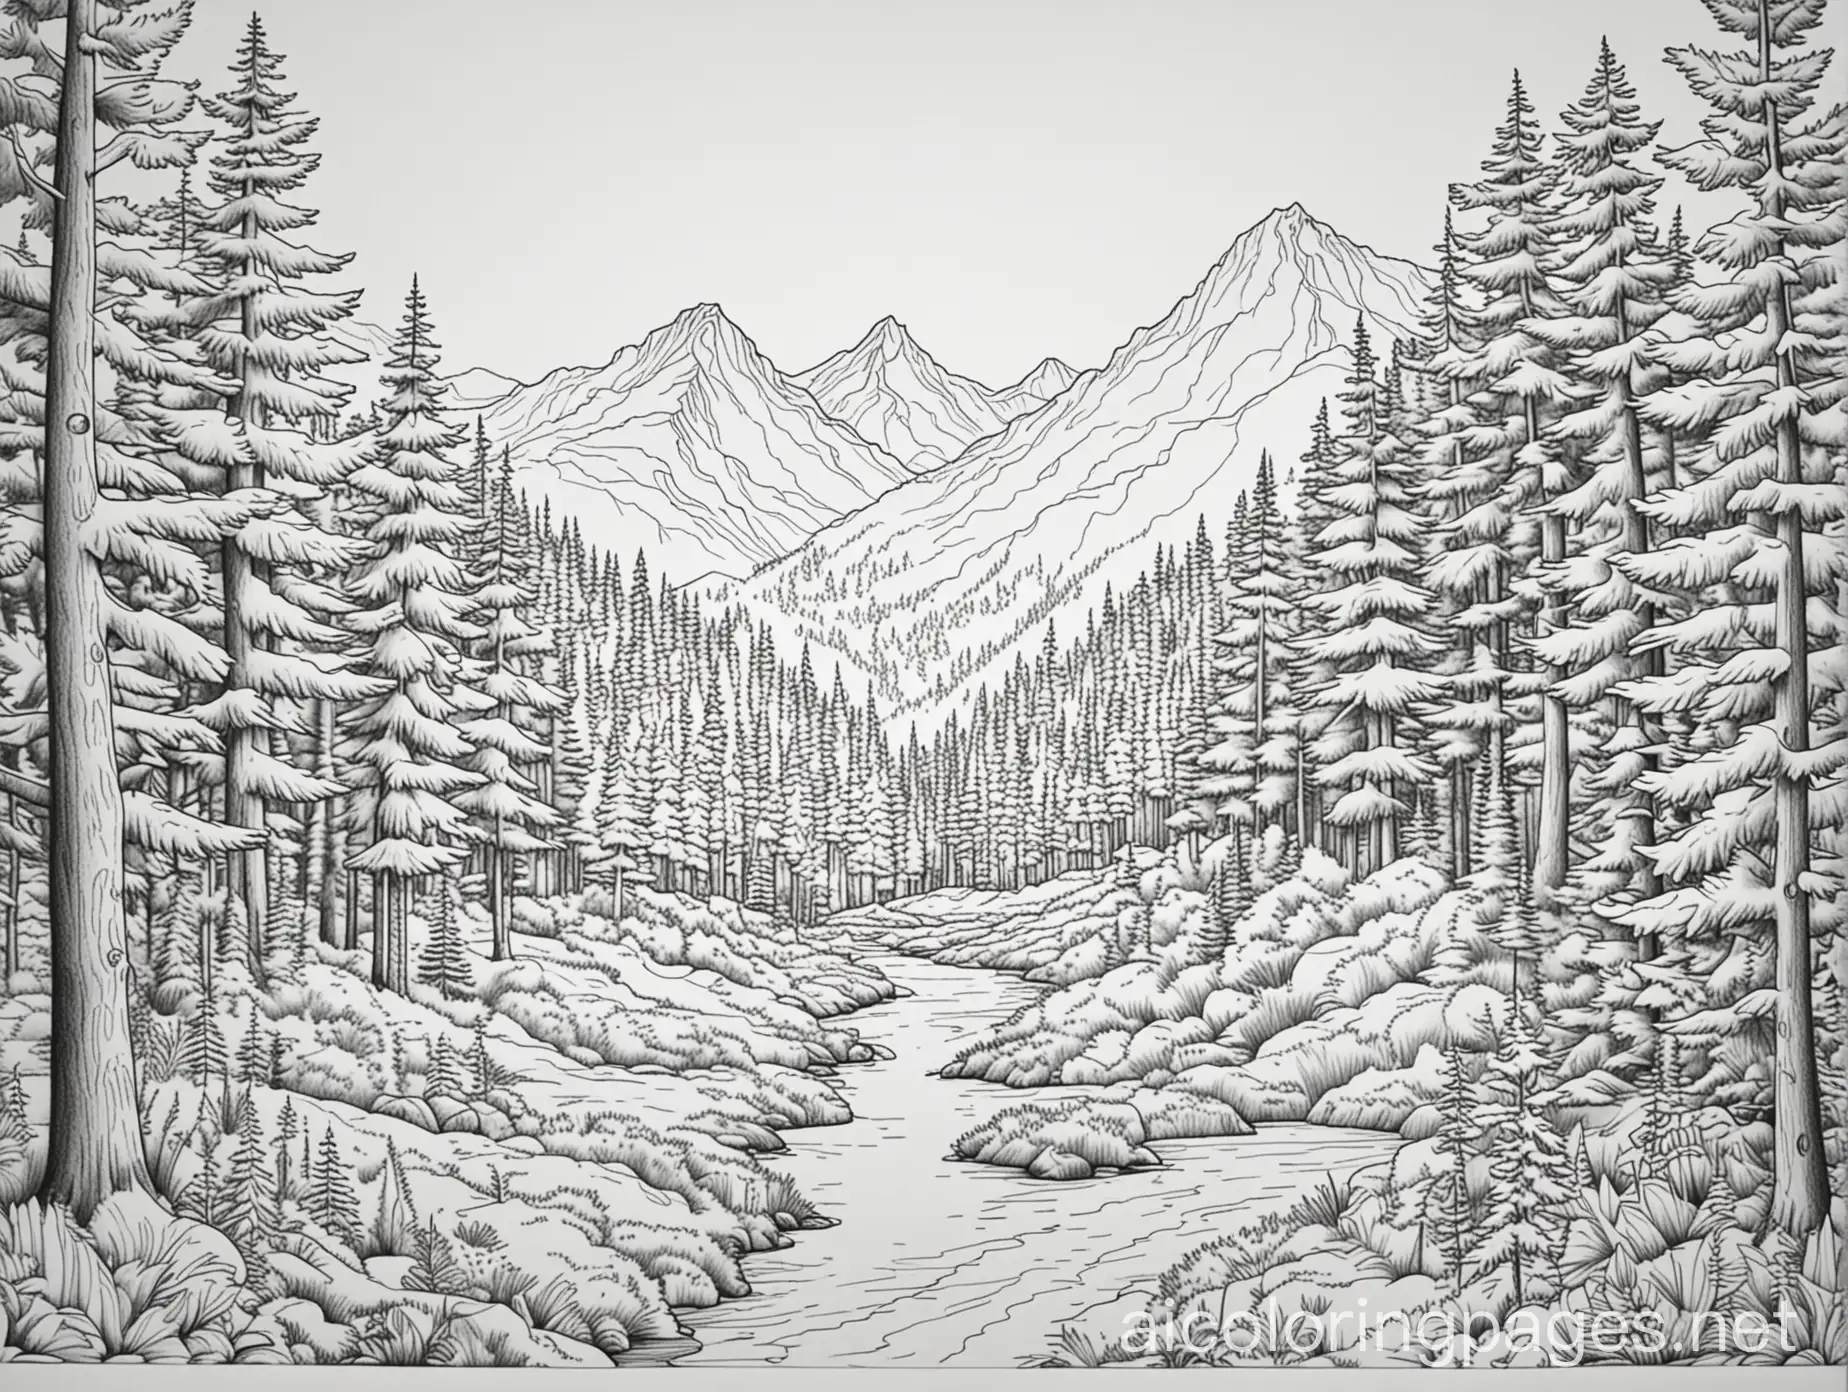 Coloring board with a Forest with some mountain in the back ground. 1080x720 dimension. Well detailed, Coloring Page, black and white, line art, white background, Simplicity, Ample White Space. The background of the coloring page is plain white to make it easy for young children to color within the lines. The outlines of all the subjects are easy to distinguish, making it simple for kids to color without too much difficulty